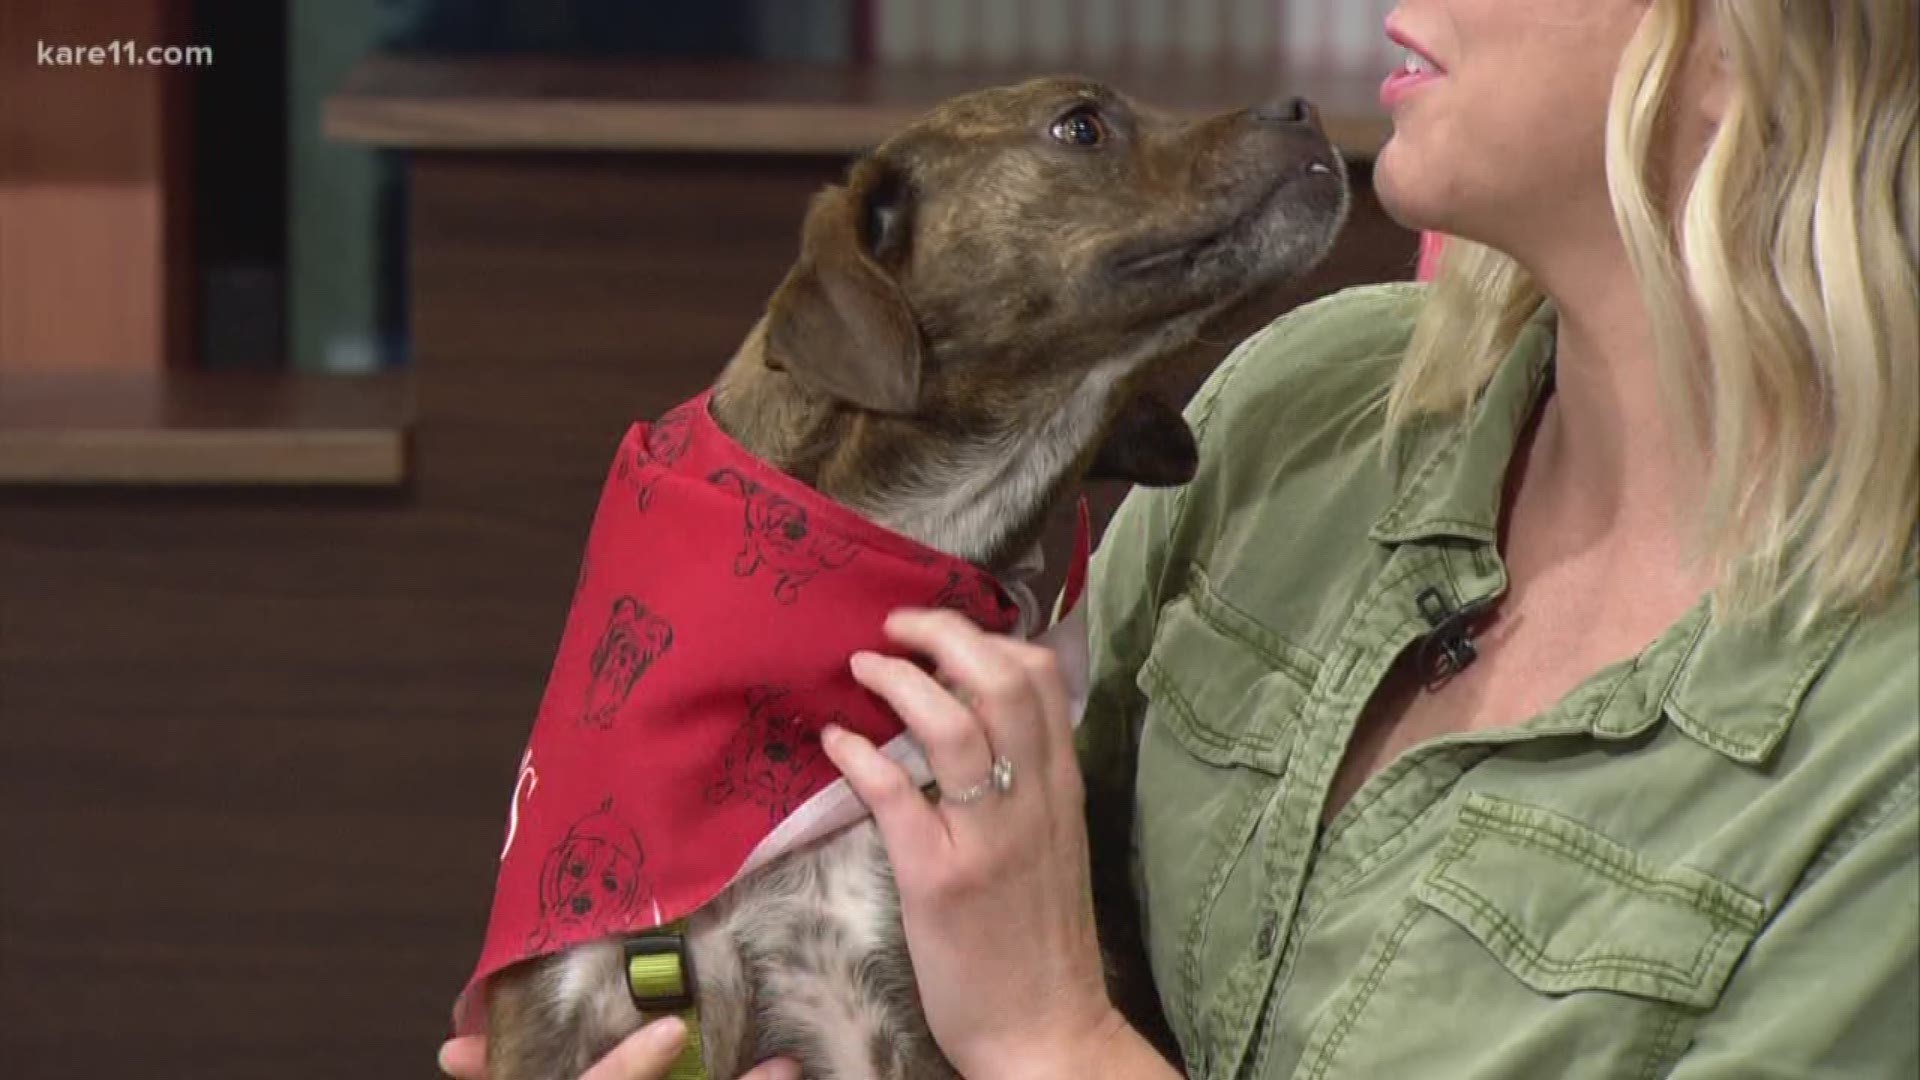 Second Hand Hounds is a Minnetonka-based organization that exists to find shelter animals their forever homes.